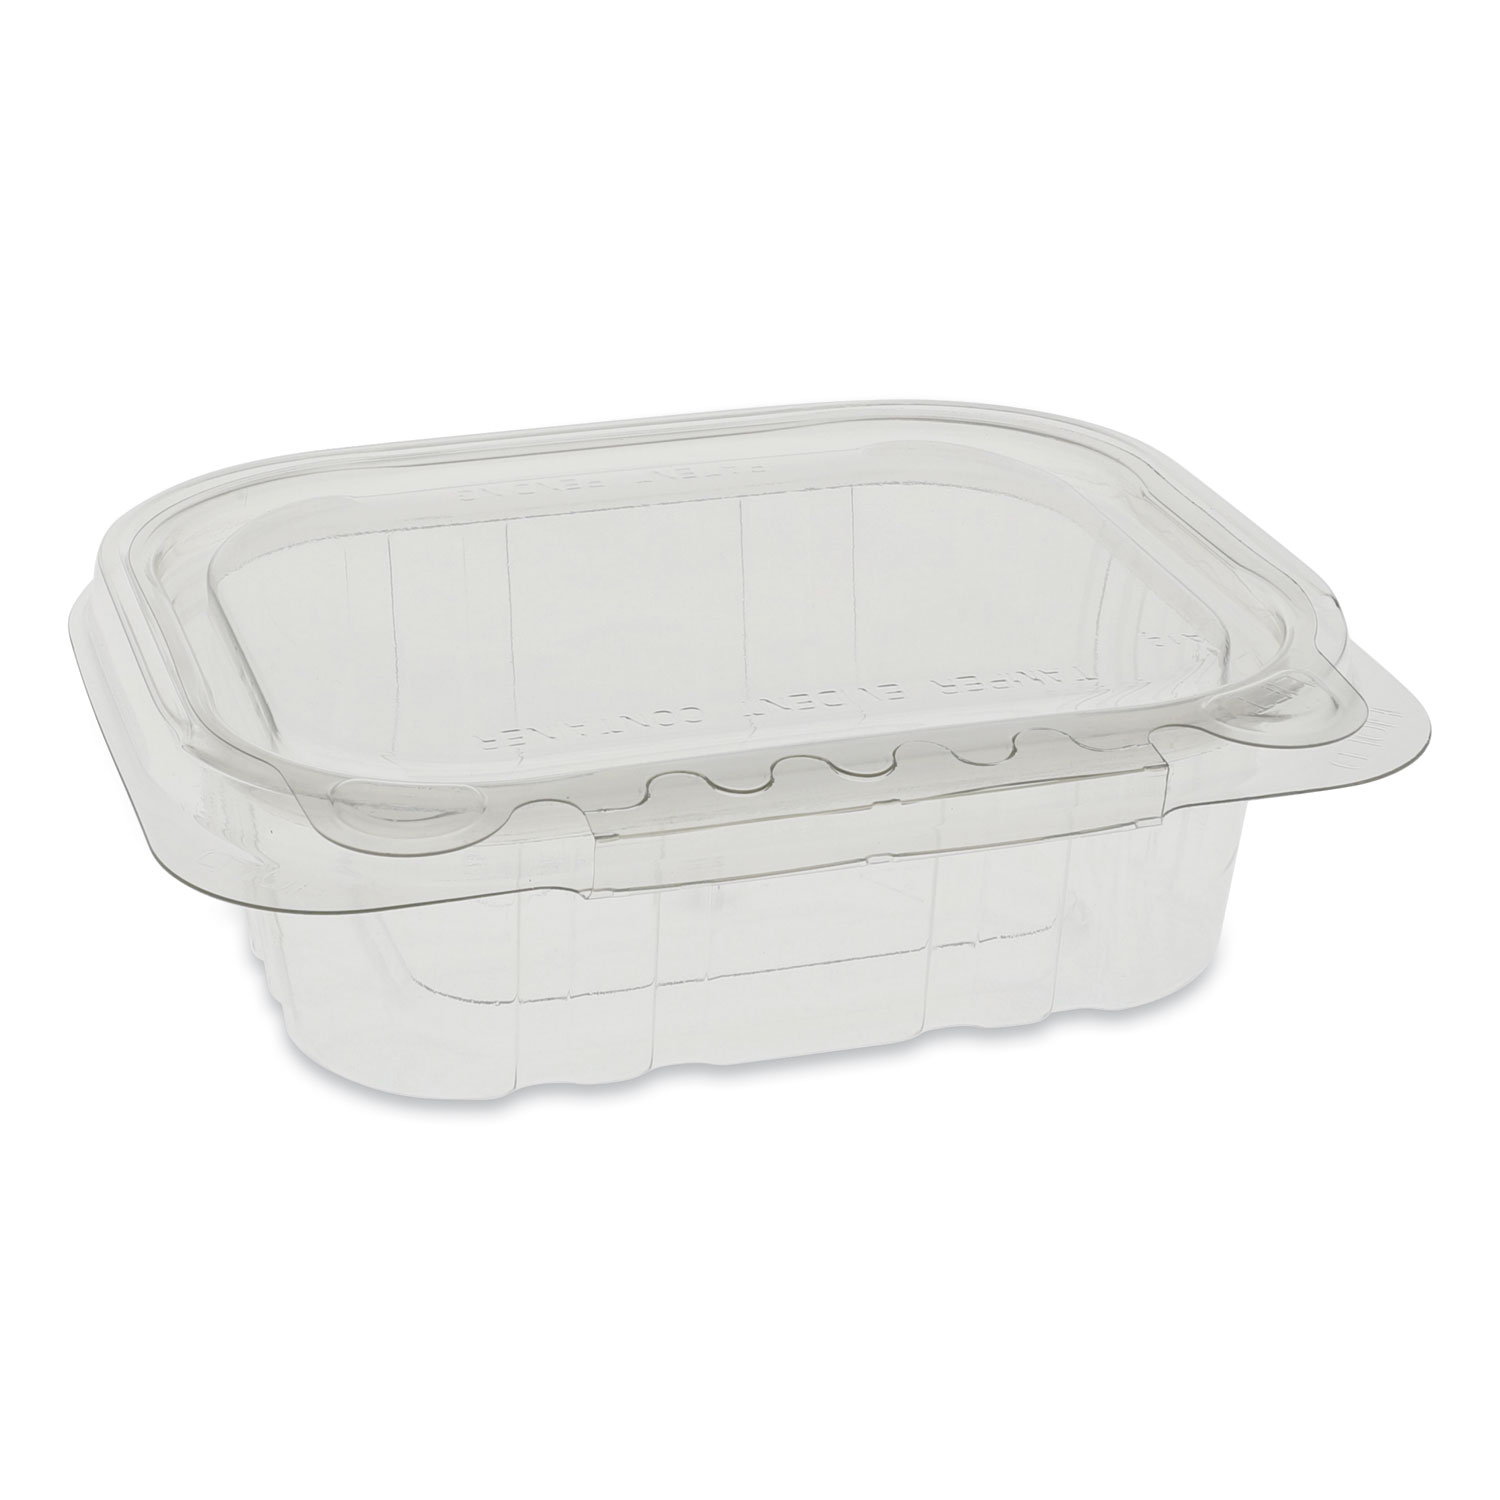  Pactiv TEHL5X408 EarthChoice Tamper Evident Deli Container, 8 oz, 5.38 x 4.5 x 1.5, 1-Compartment, Clear, 320/Carton (PCTTEHL5X408) 